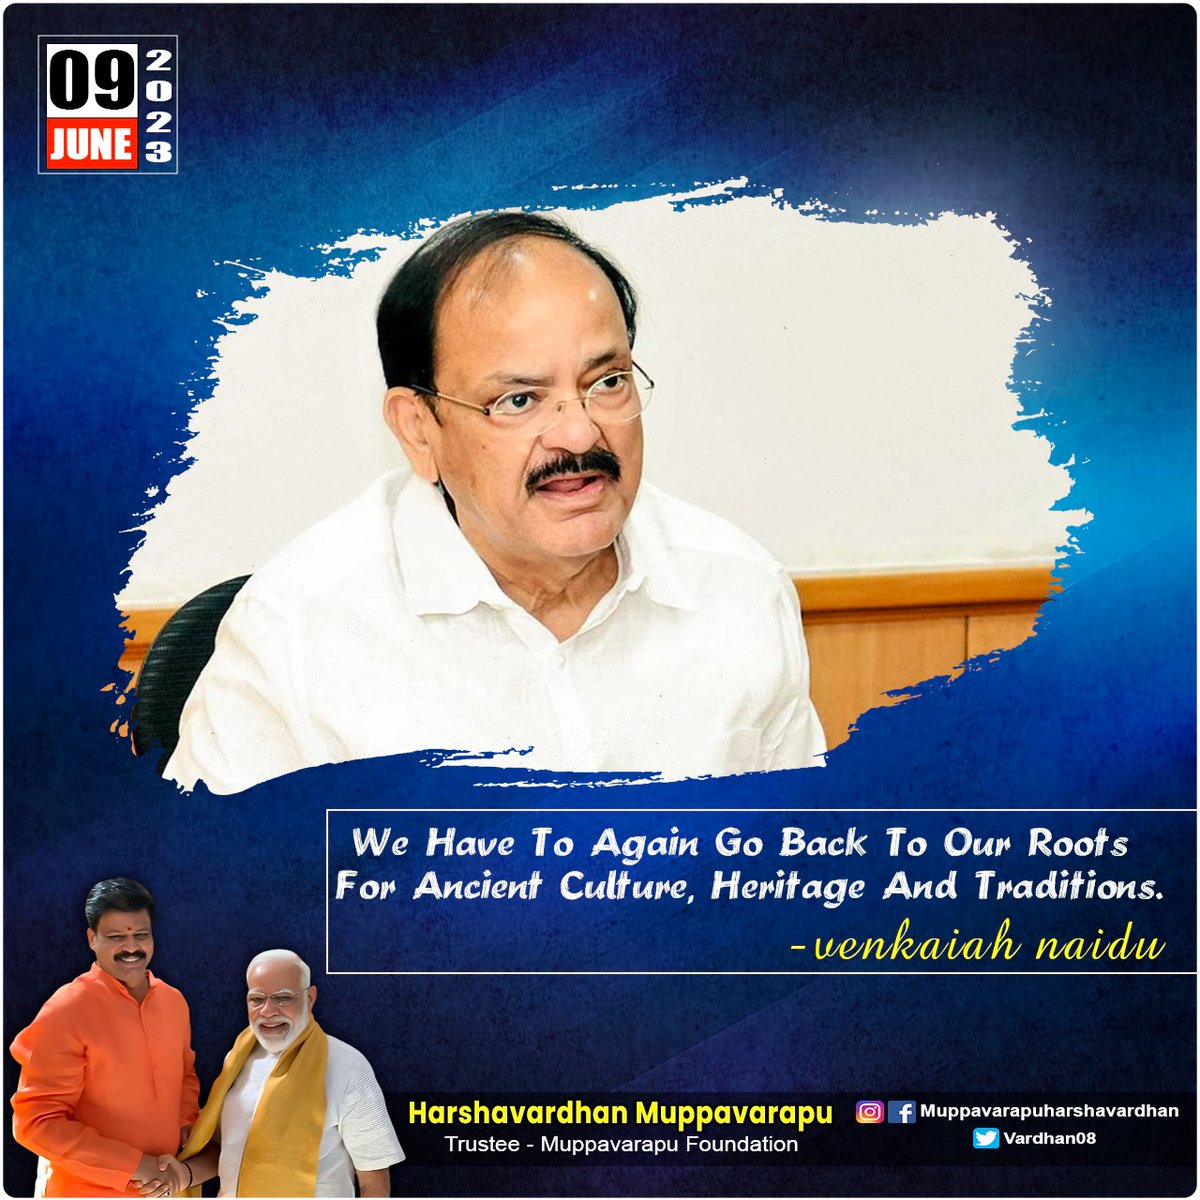 We have to again go back to our roots for ancient culture, heritage and traditions.

- #venkaiahnaidu

#GoodMorningEveryone 💐